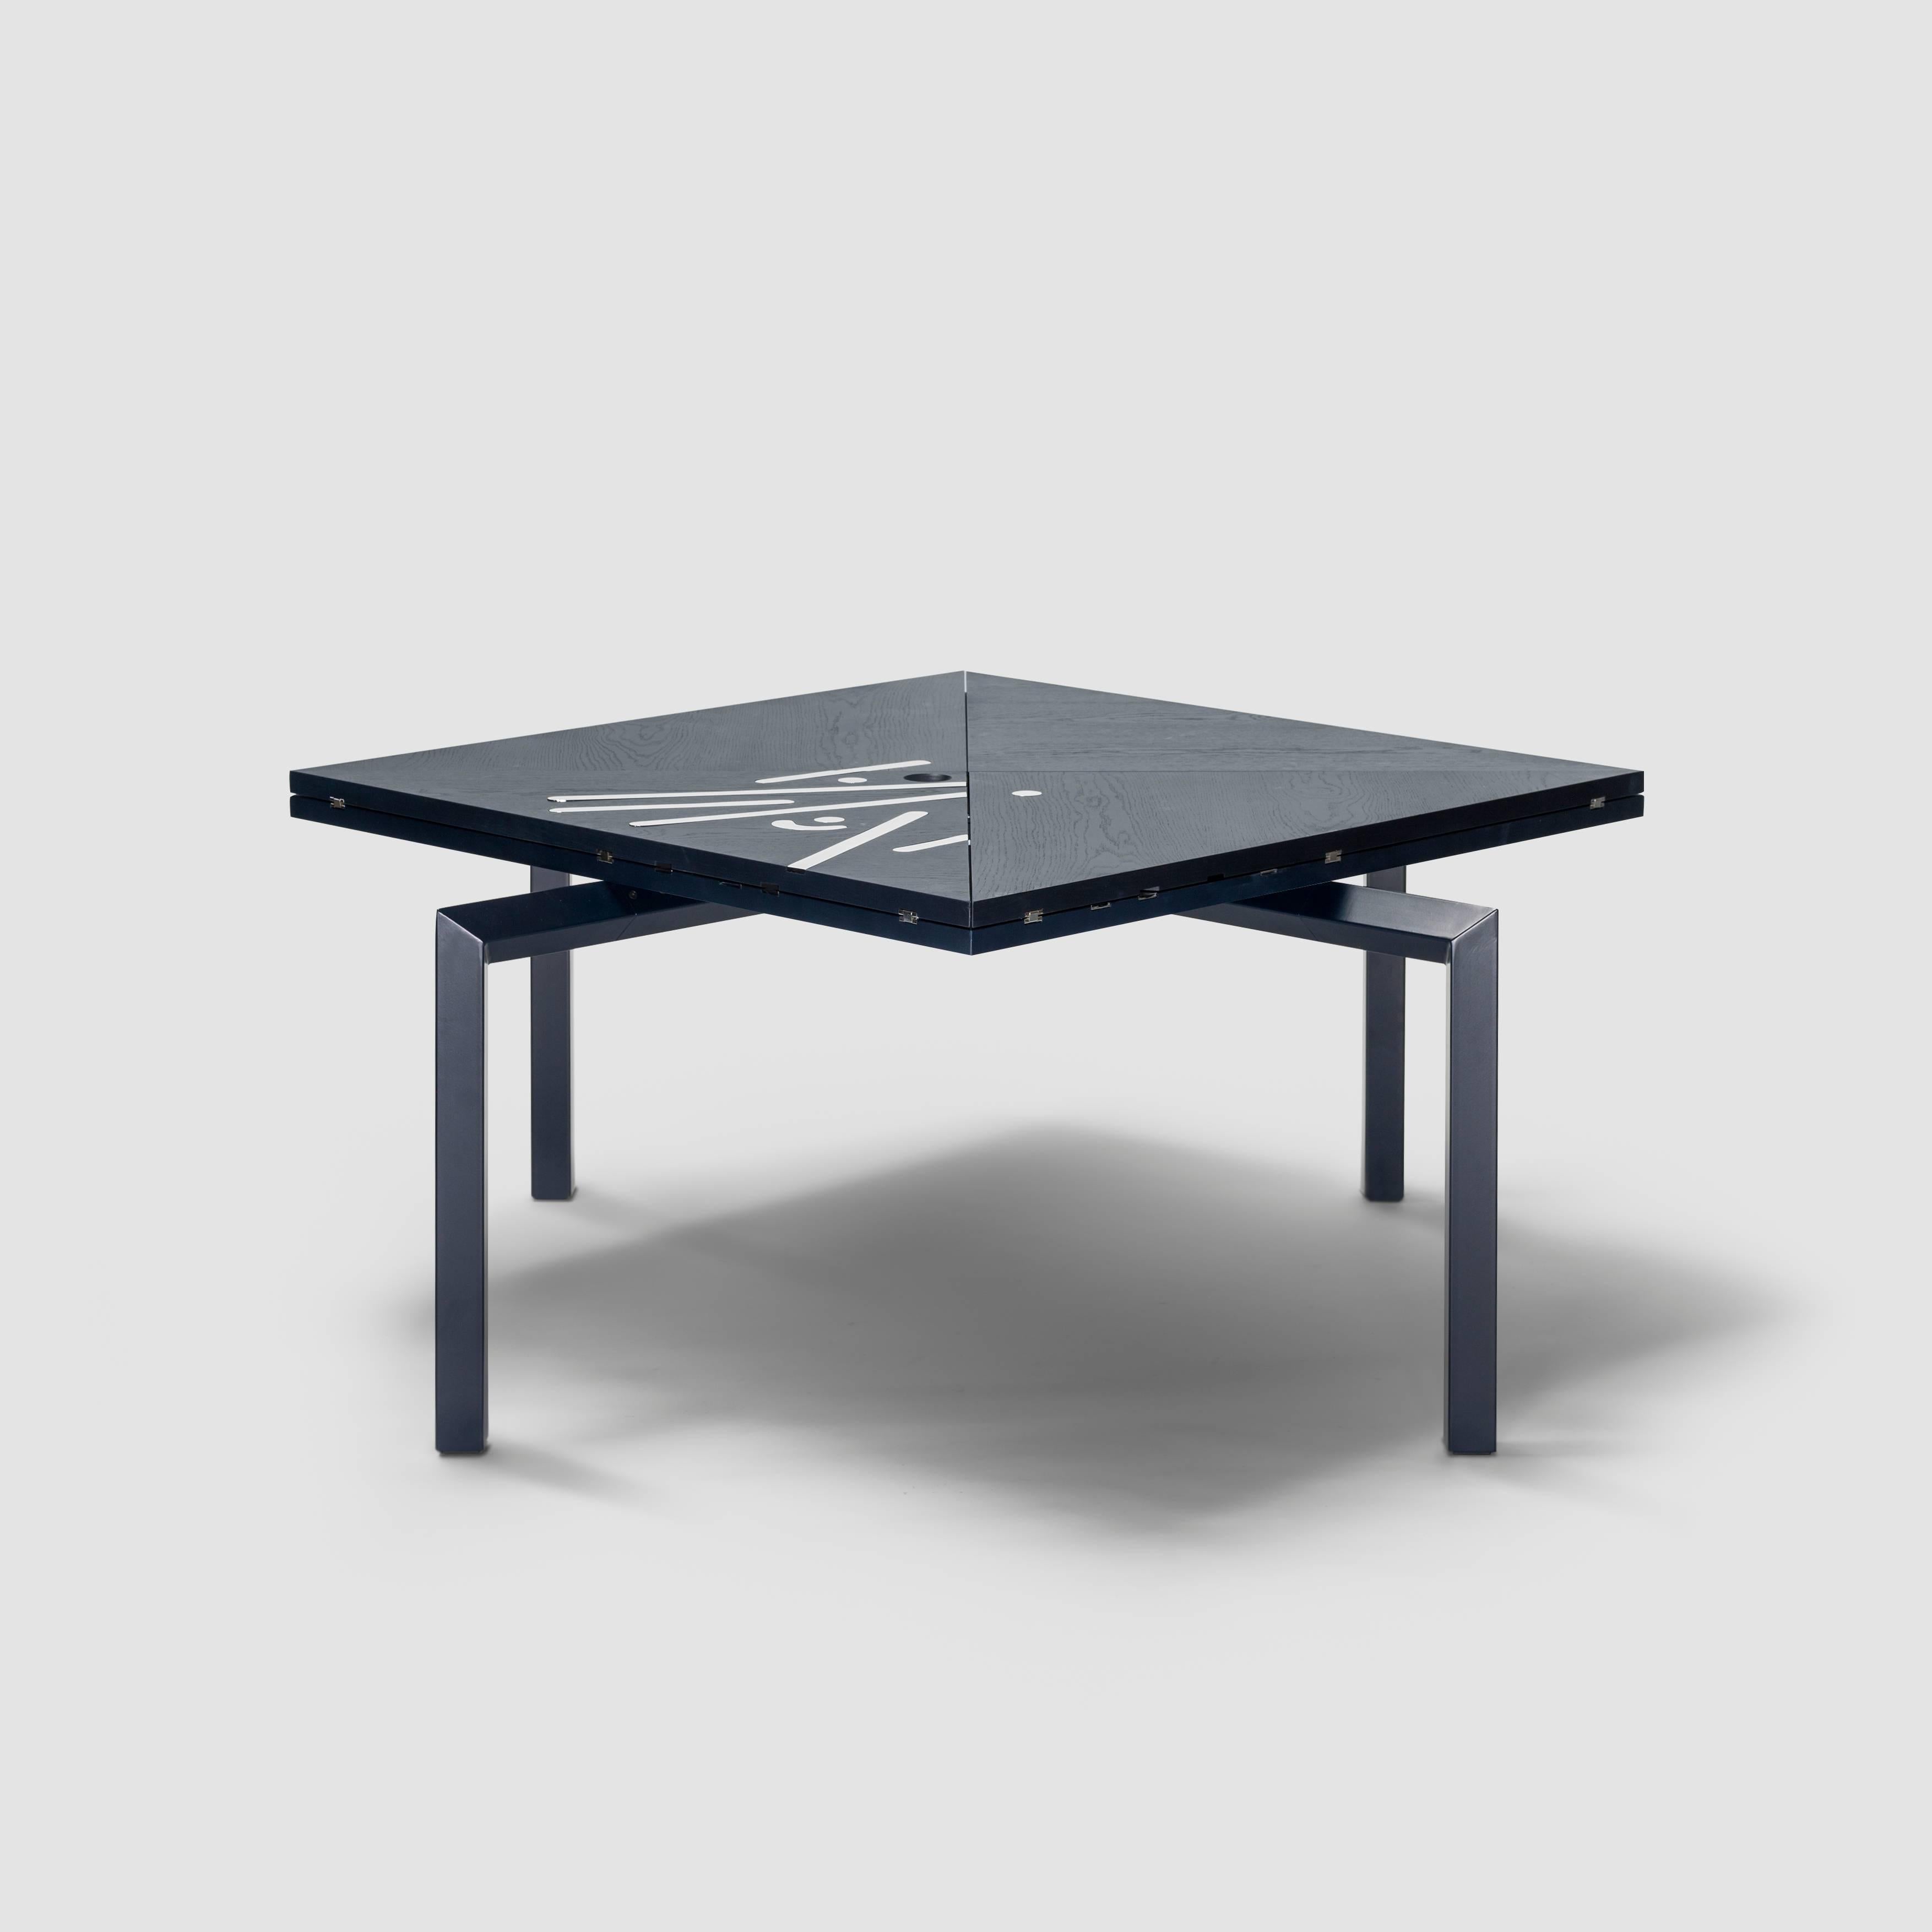 Alella table designed by Lluís Clotet.

Limited edition of 8 units + 2 artist proofs + 2 prototypes.
DM, oak veneered and stained in dark blue RAL 5004.
Legs in an iron rectangular tube lacquered in the same color as the top.
Decorative